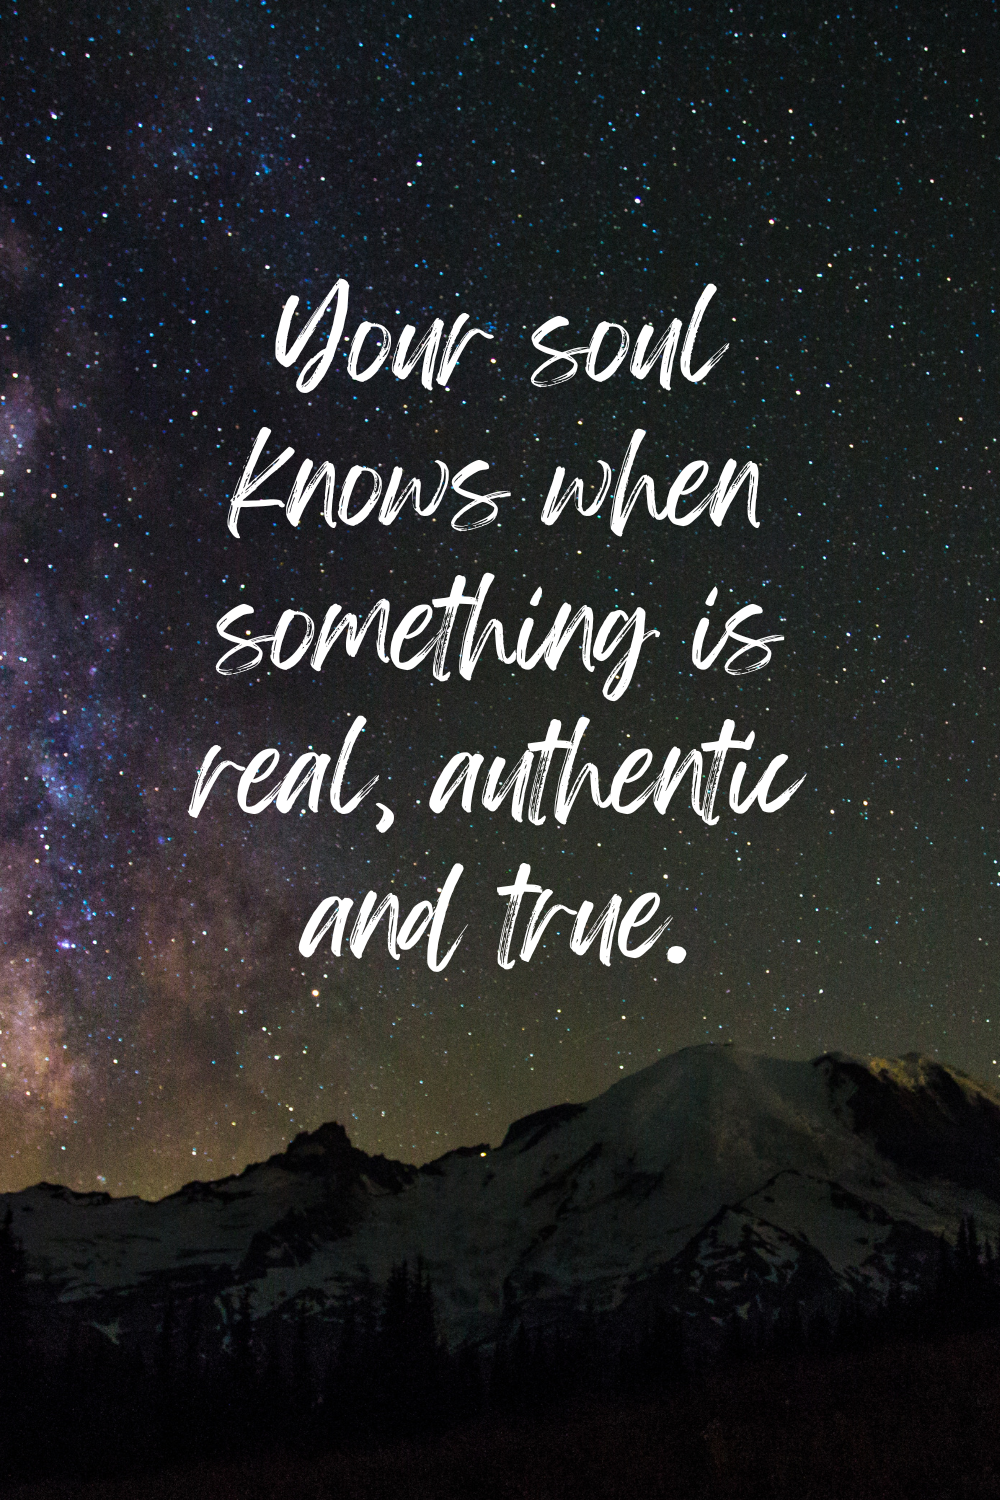 Your soul knows when something is real, authentic and true. No matter what anyone else tries to say or convince you of - the truth will always feel different.